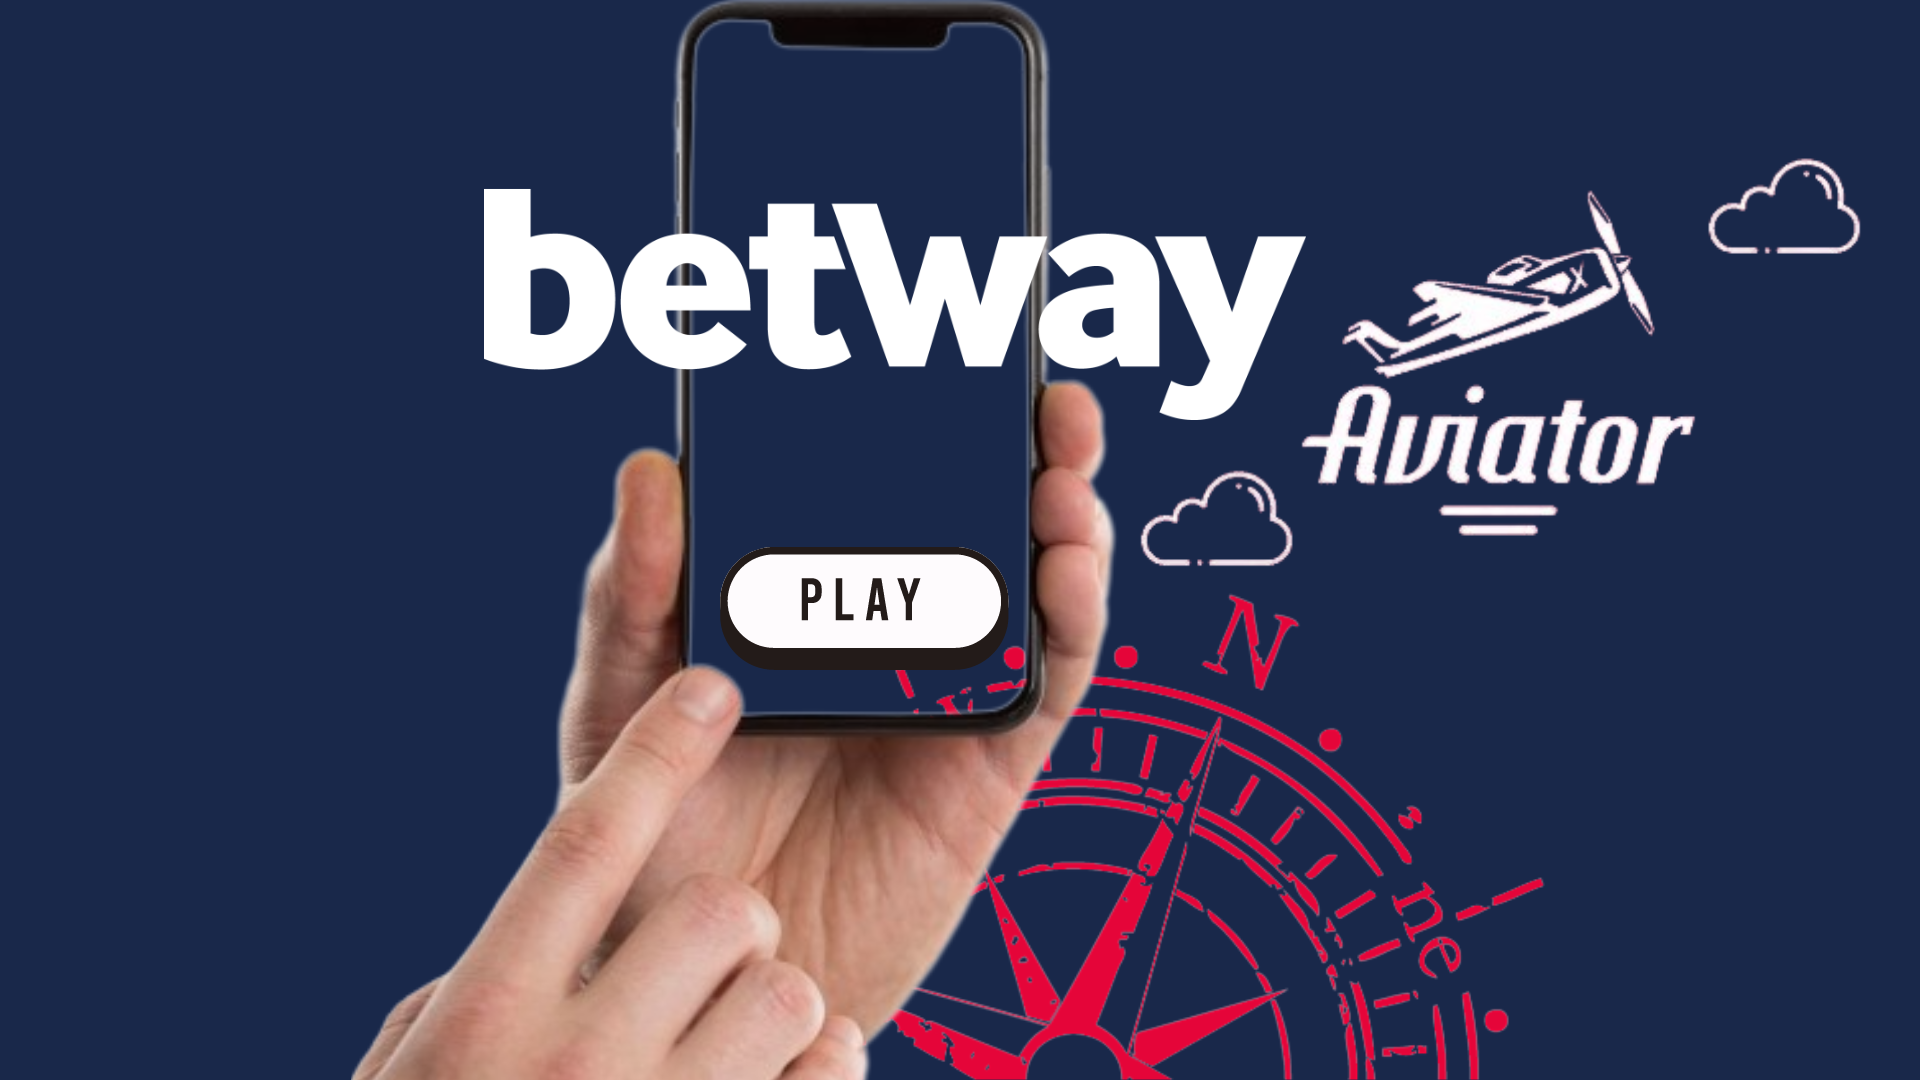 A hand holding the phone with Betway logo on it and Aviator app logo